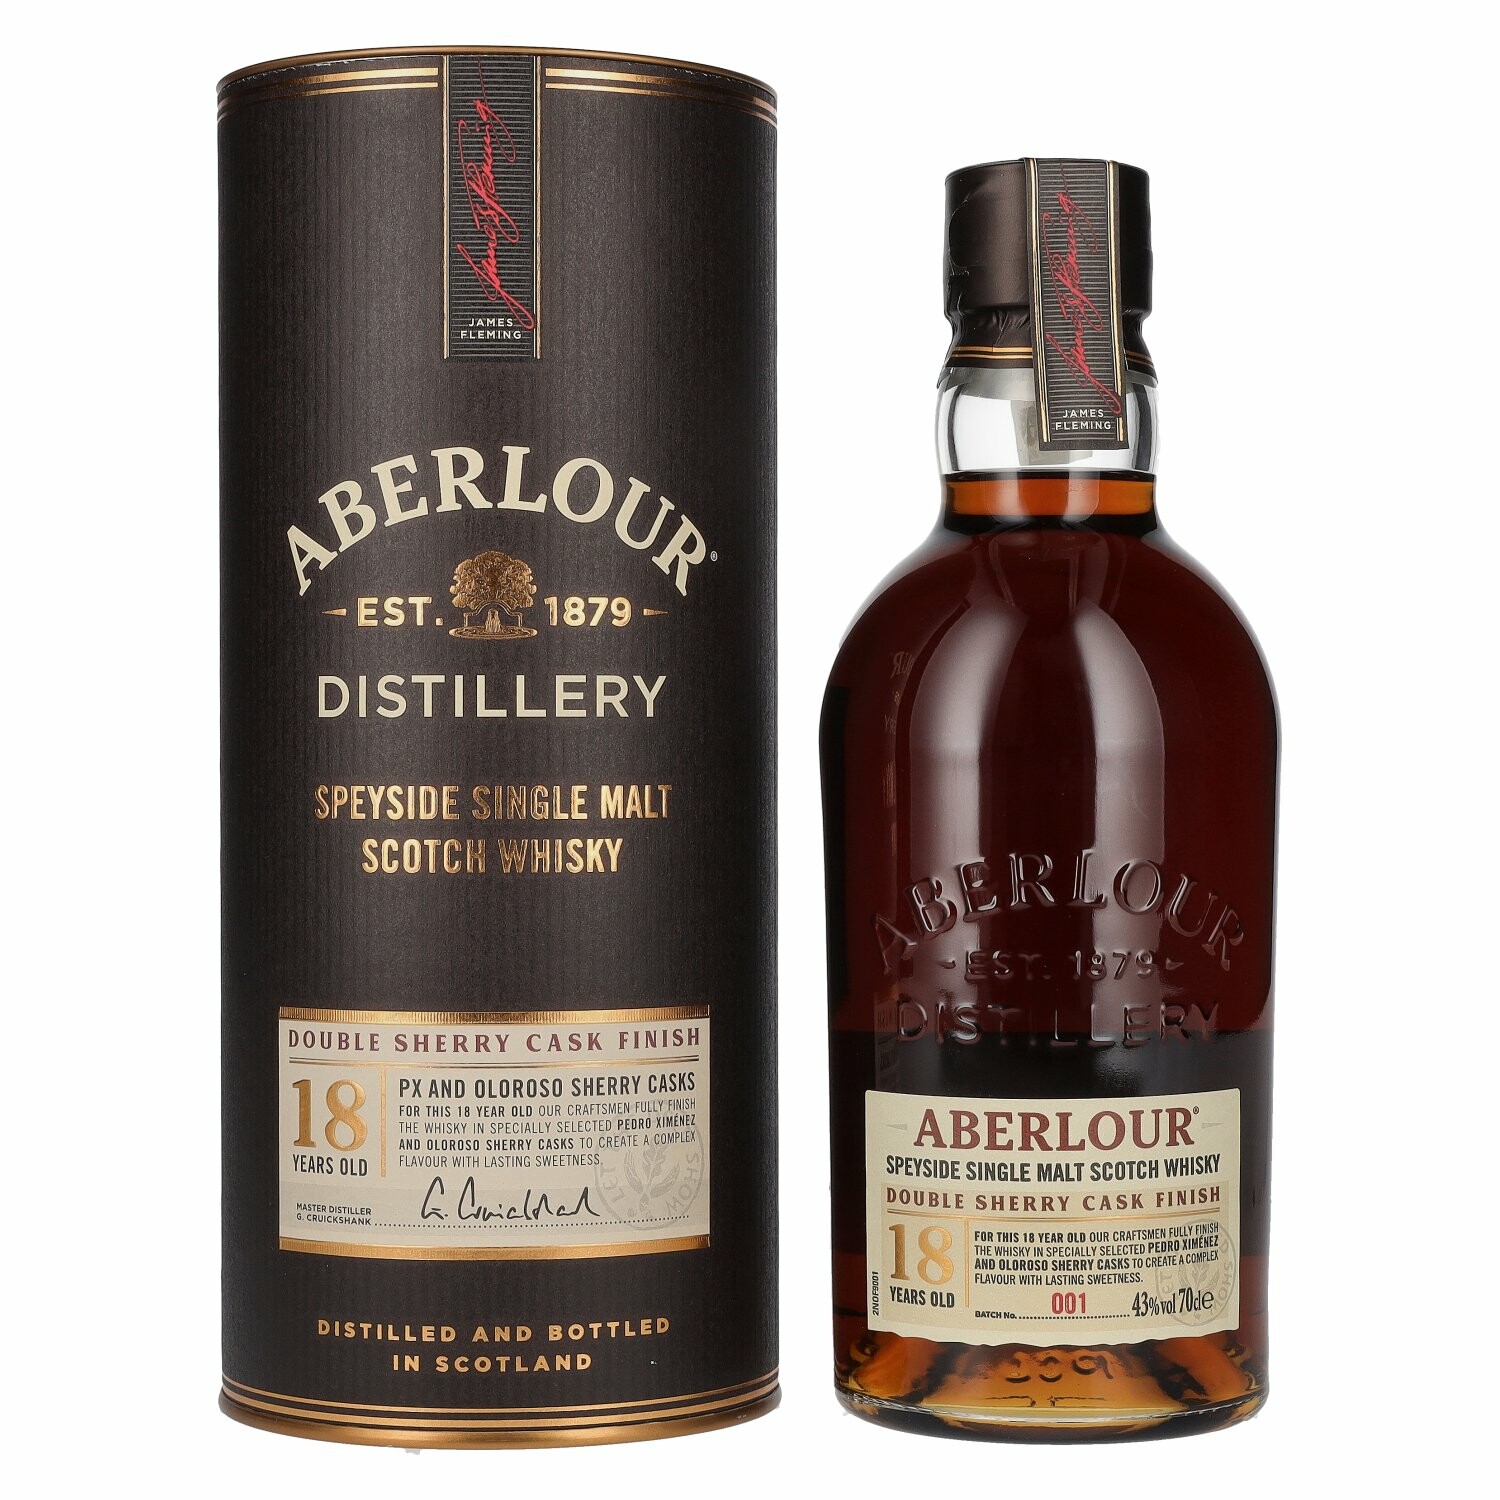 Aberlour 18 Years Old Double Sherry Cask Finish 43% Vol. 0,7l in Giftbox